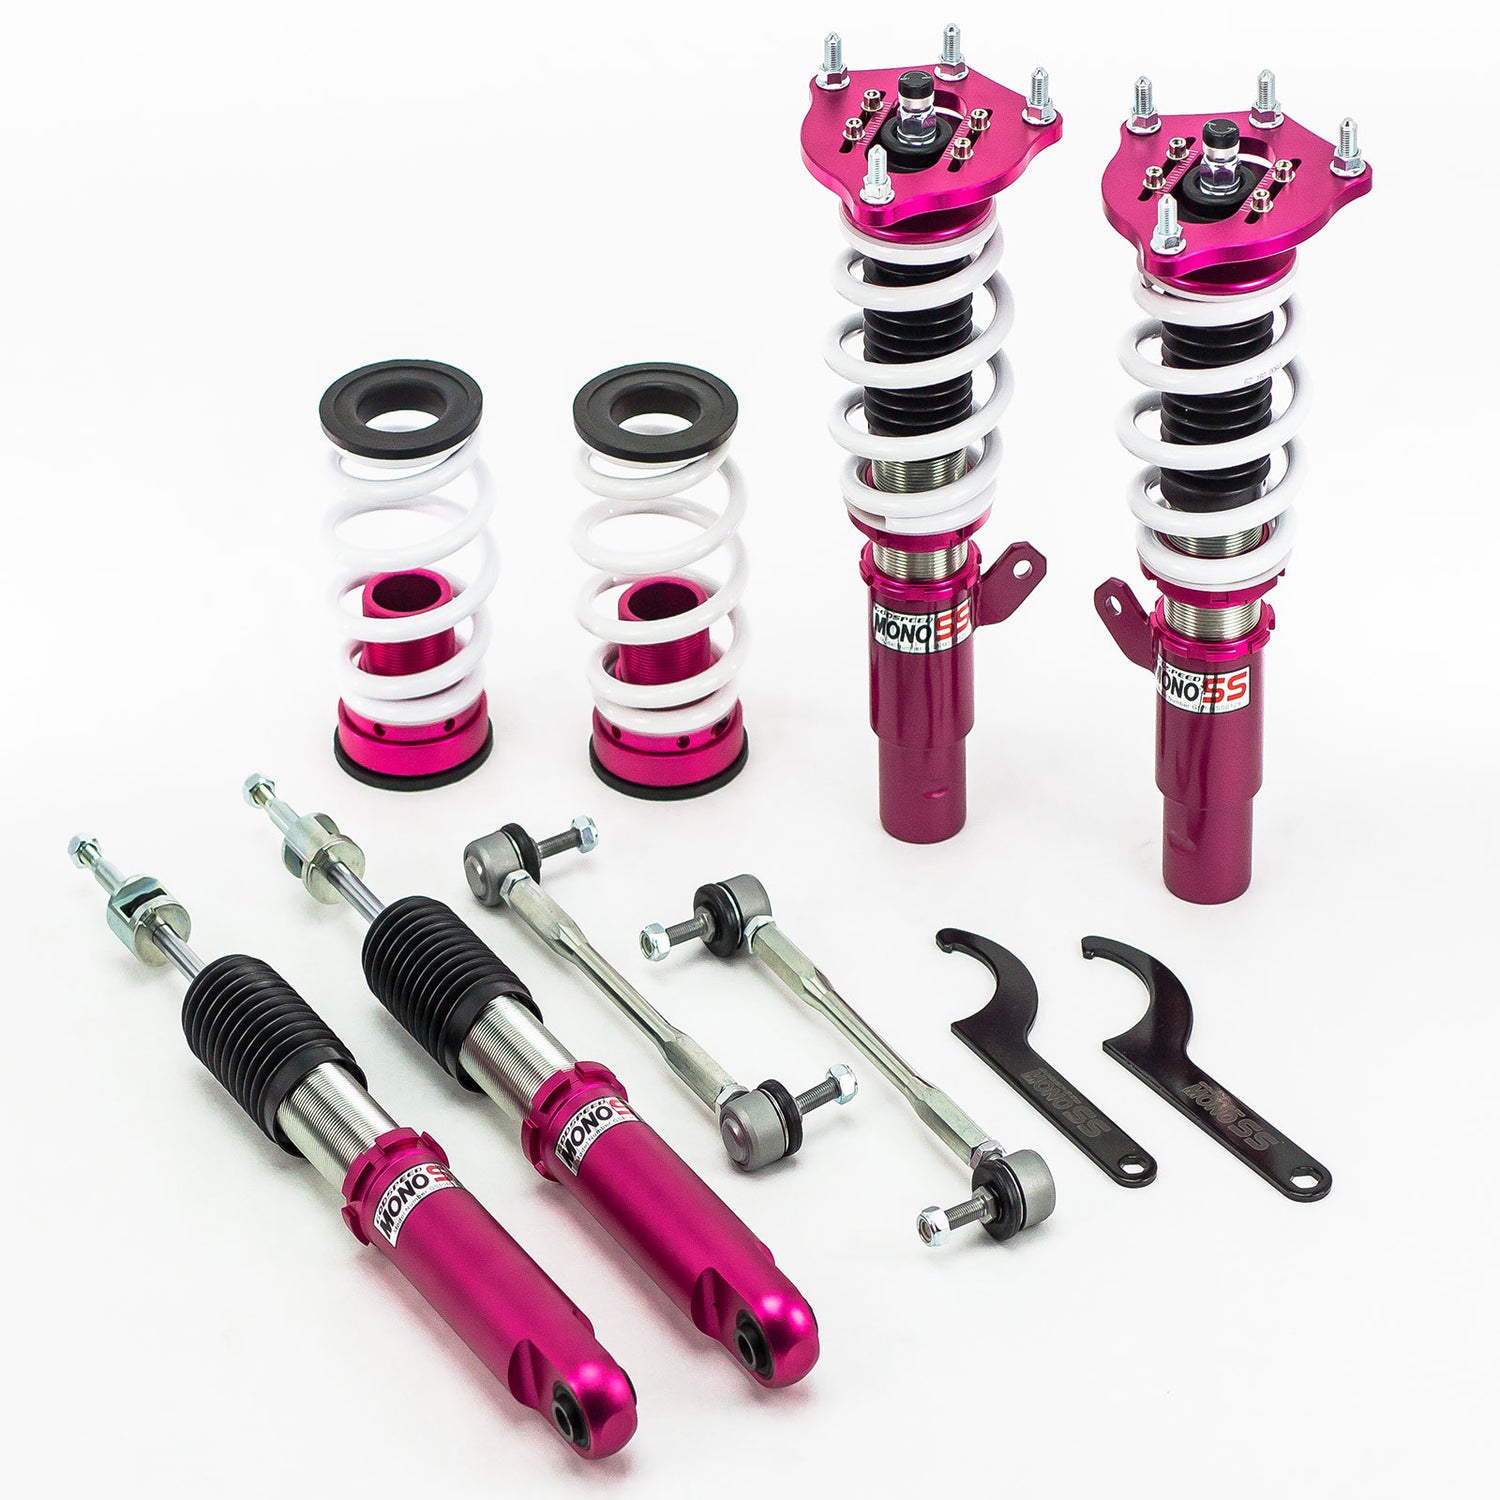 Godspeed MSS0129 MonoSS Coilover Lowering Kit, Fully Adjustable, Ride Height, Spring Tension And 16 Click Damping, Honda Civic(FC) EX/LX 2016+UP